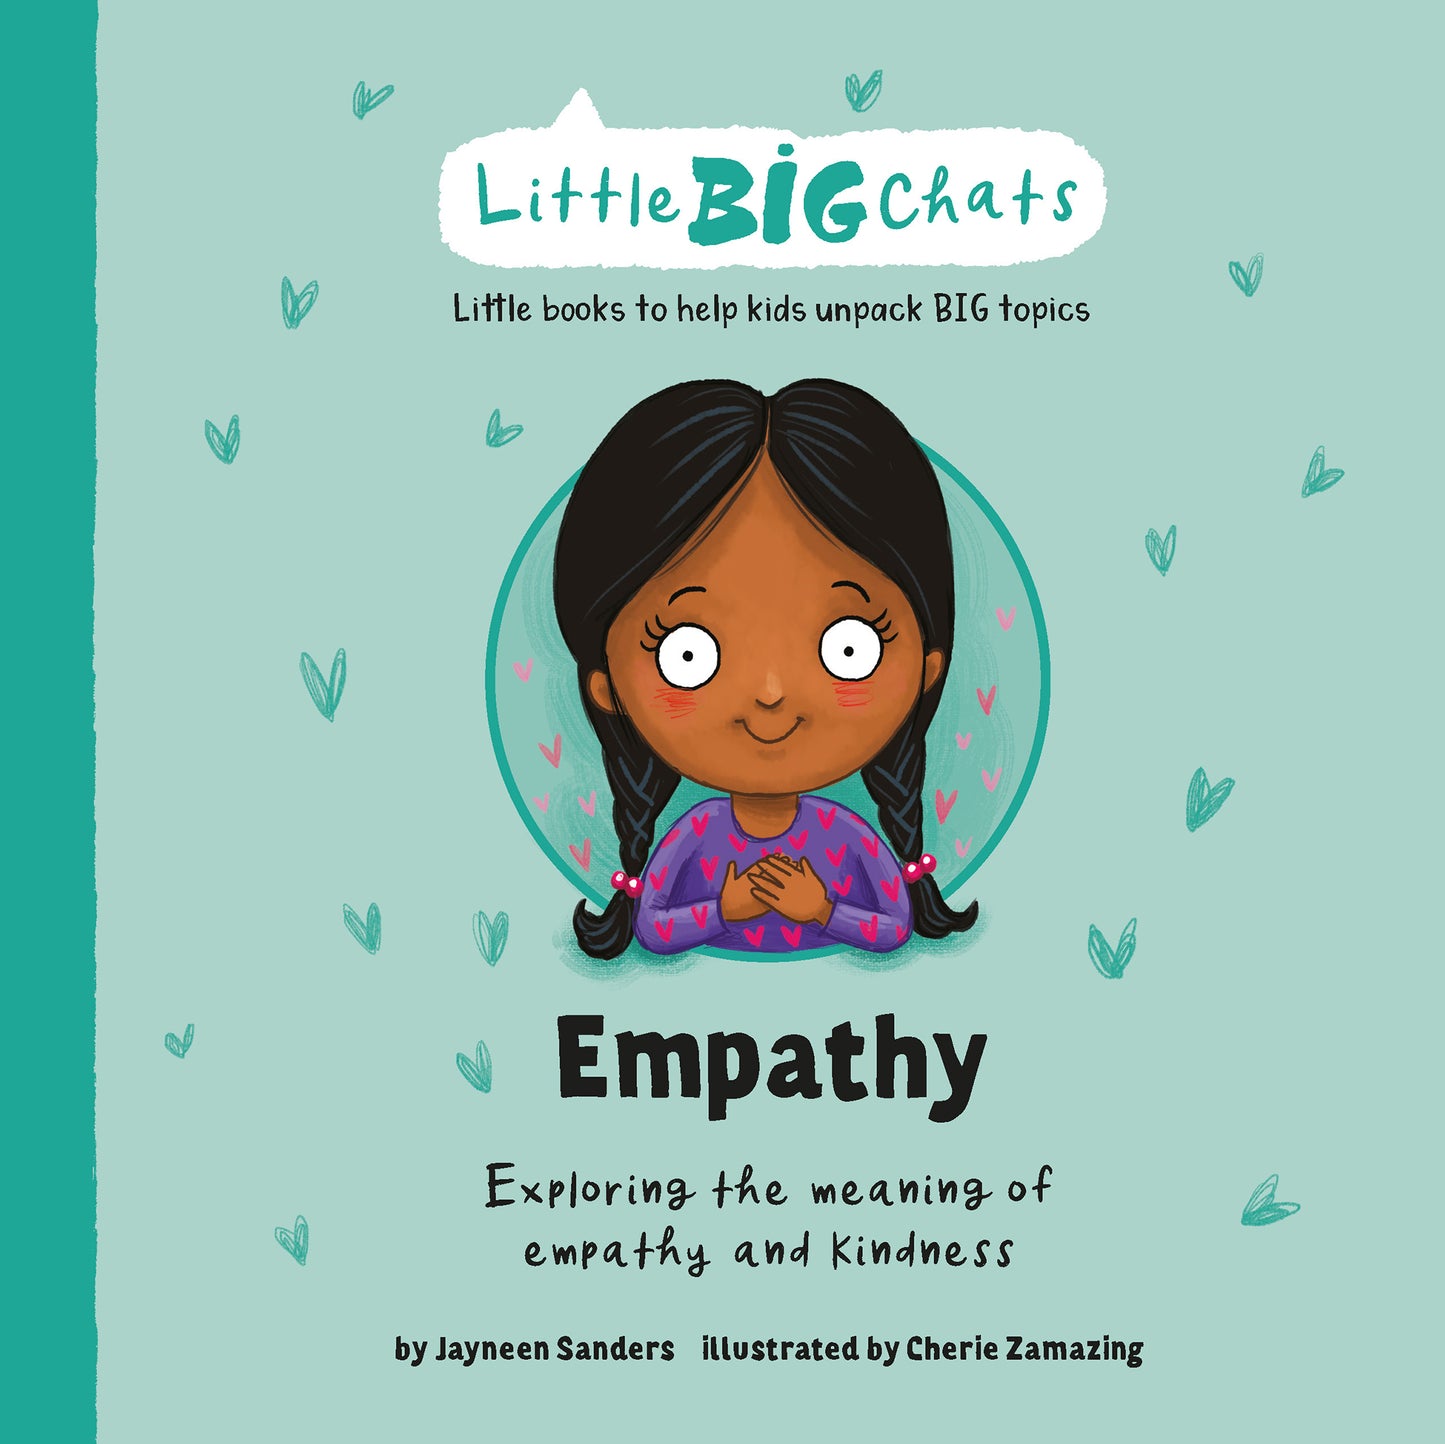 The cover of the the Little BIG Chats book 'Empathy' by Jayneen Sanders